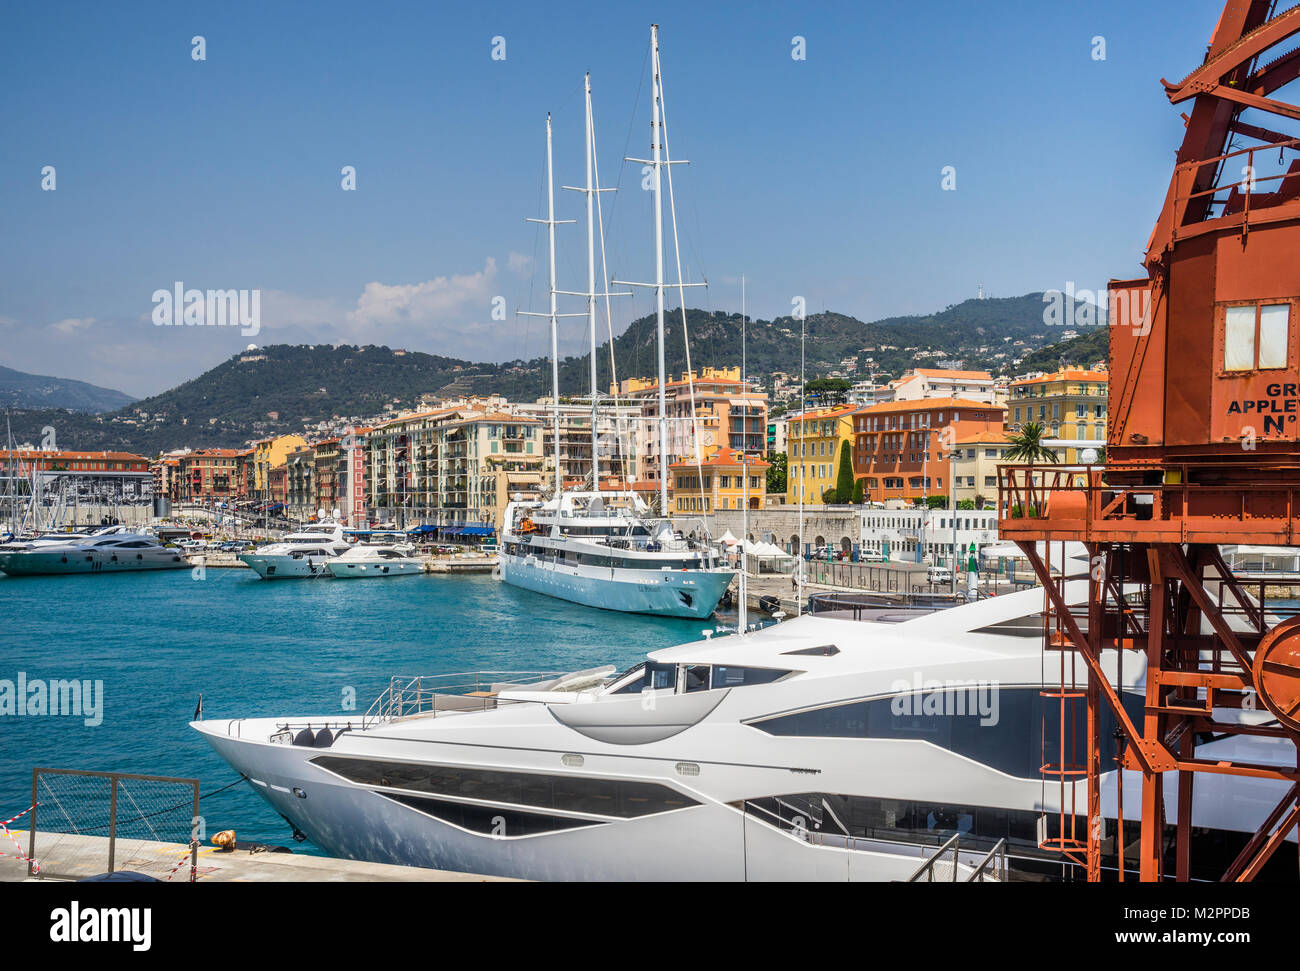 France, Alpes-Maritime department, Côte d'Azur, Nice, luxury yachts at Port Lympia Stock Photo